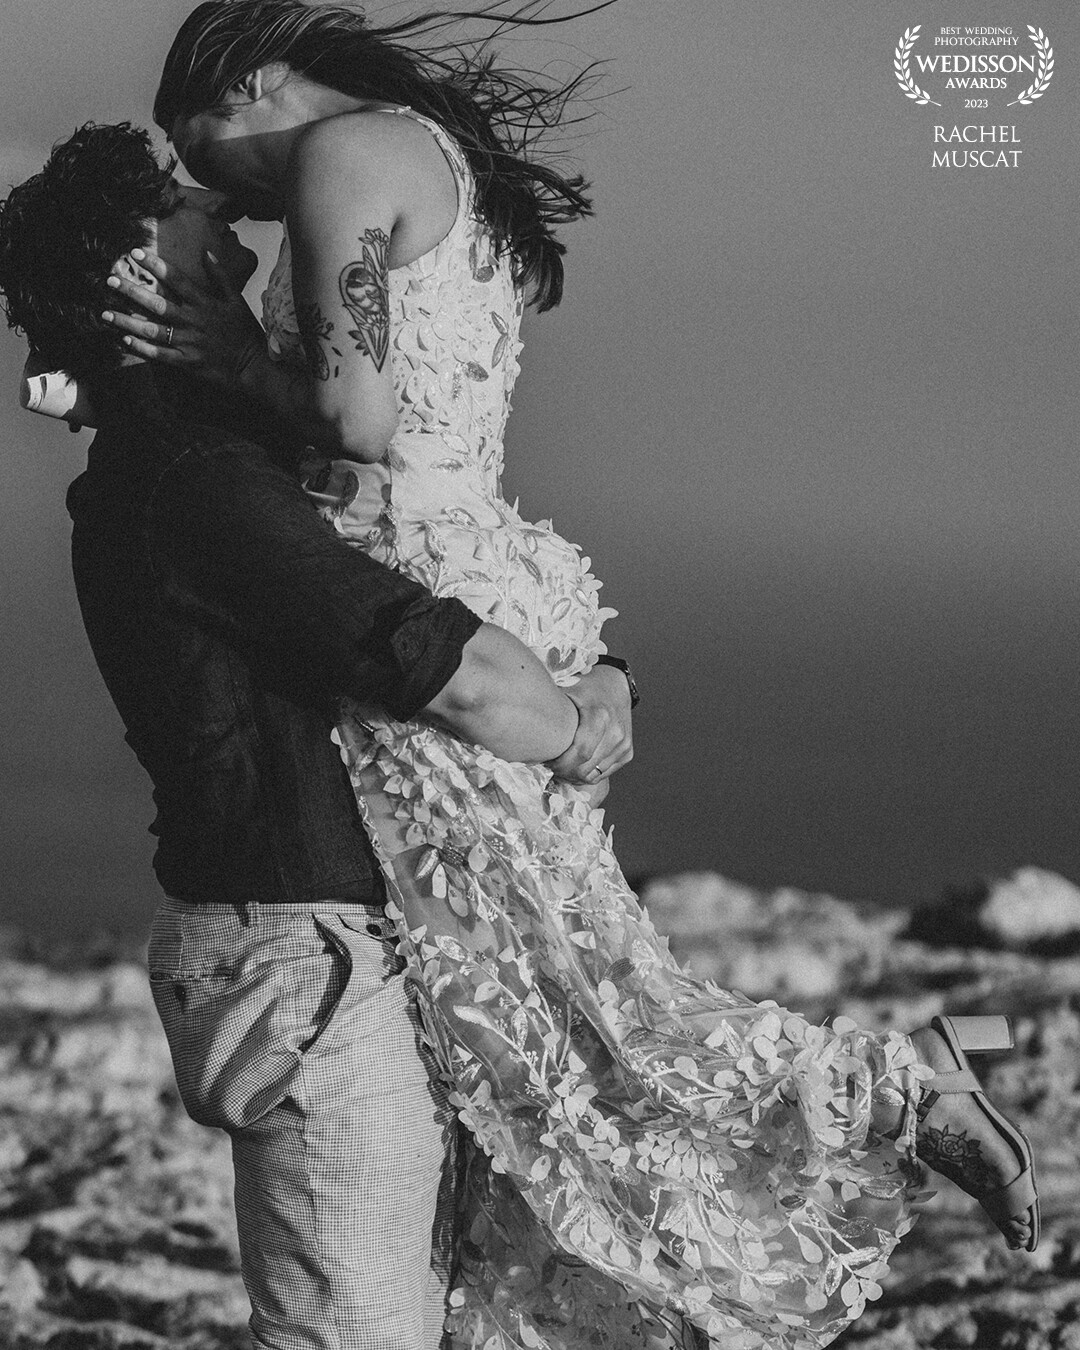 Keisha & Mason , flew all the way to Malta from Canada for a holiday and decided to book a engagement shoot and exchange vows at Dingli Cliffs . We decided to start by taking some photos at Mdina , then Buskett, then for some sunset vibes at Dingli Cliffs . <br />
We were hoping for good weather , and it was just perfect , little bit sunny but not too much and a lovely breeze ❤ <br />
These two rocked the session and their chemistry and connection is amazing <3